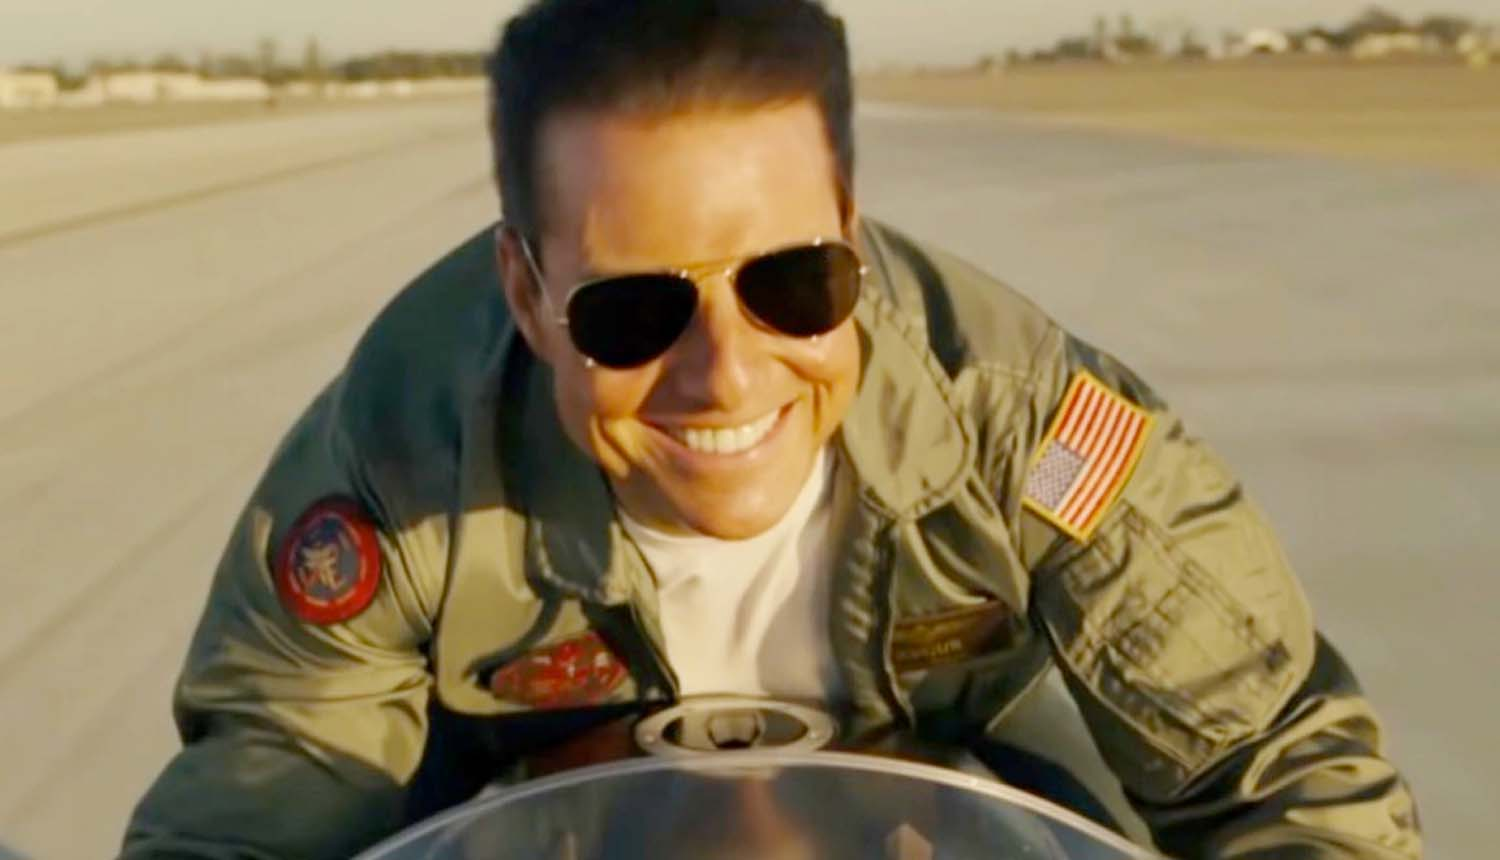 Tom Cruise created G-Force acclimation system so his ‘Top Gun: Maverick’ co-stars would stop throwing up